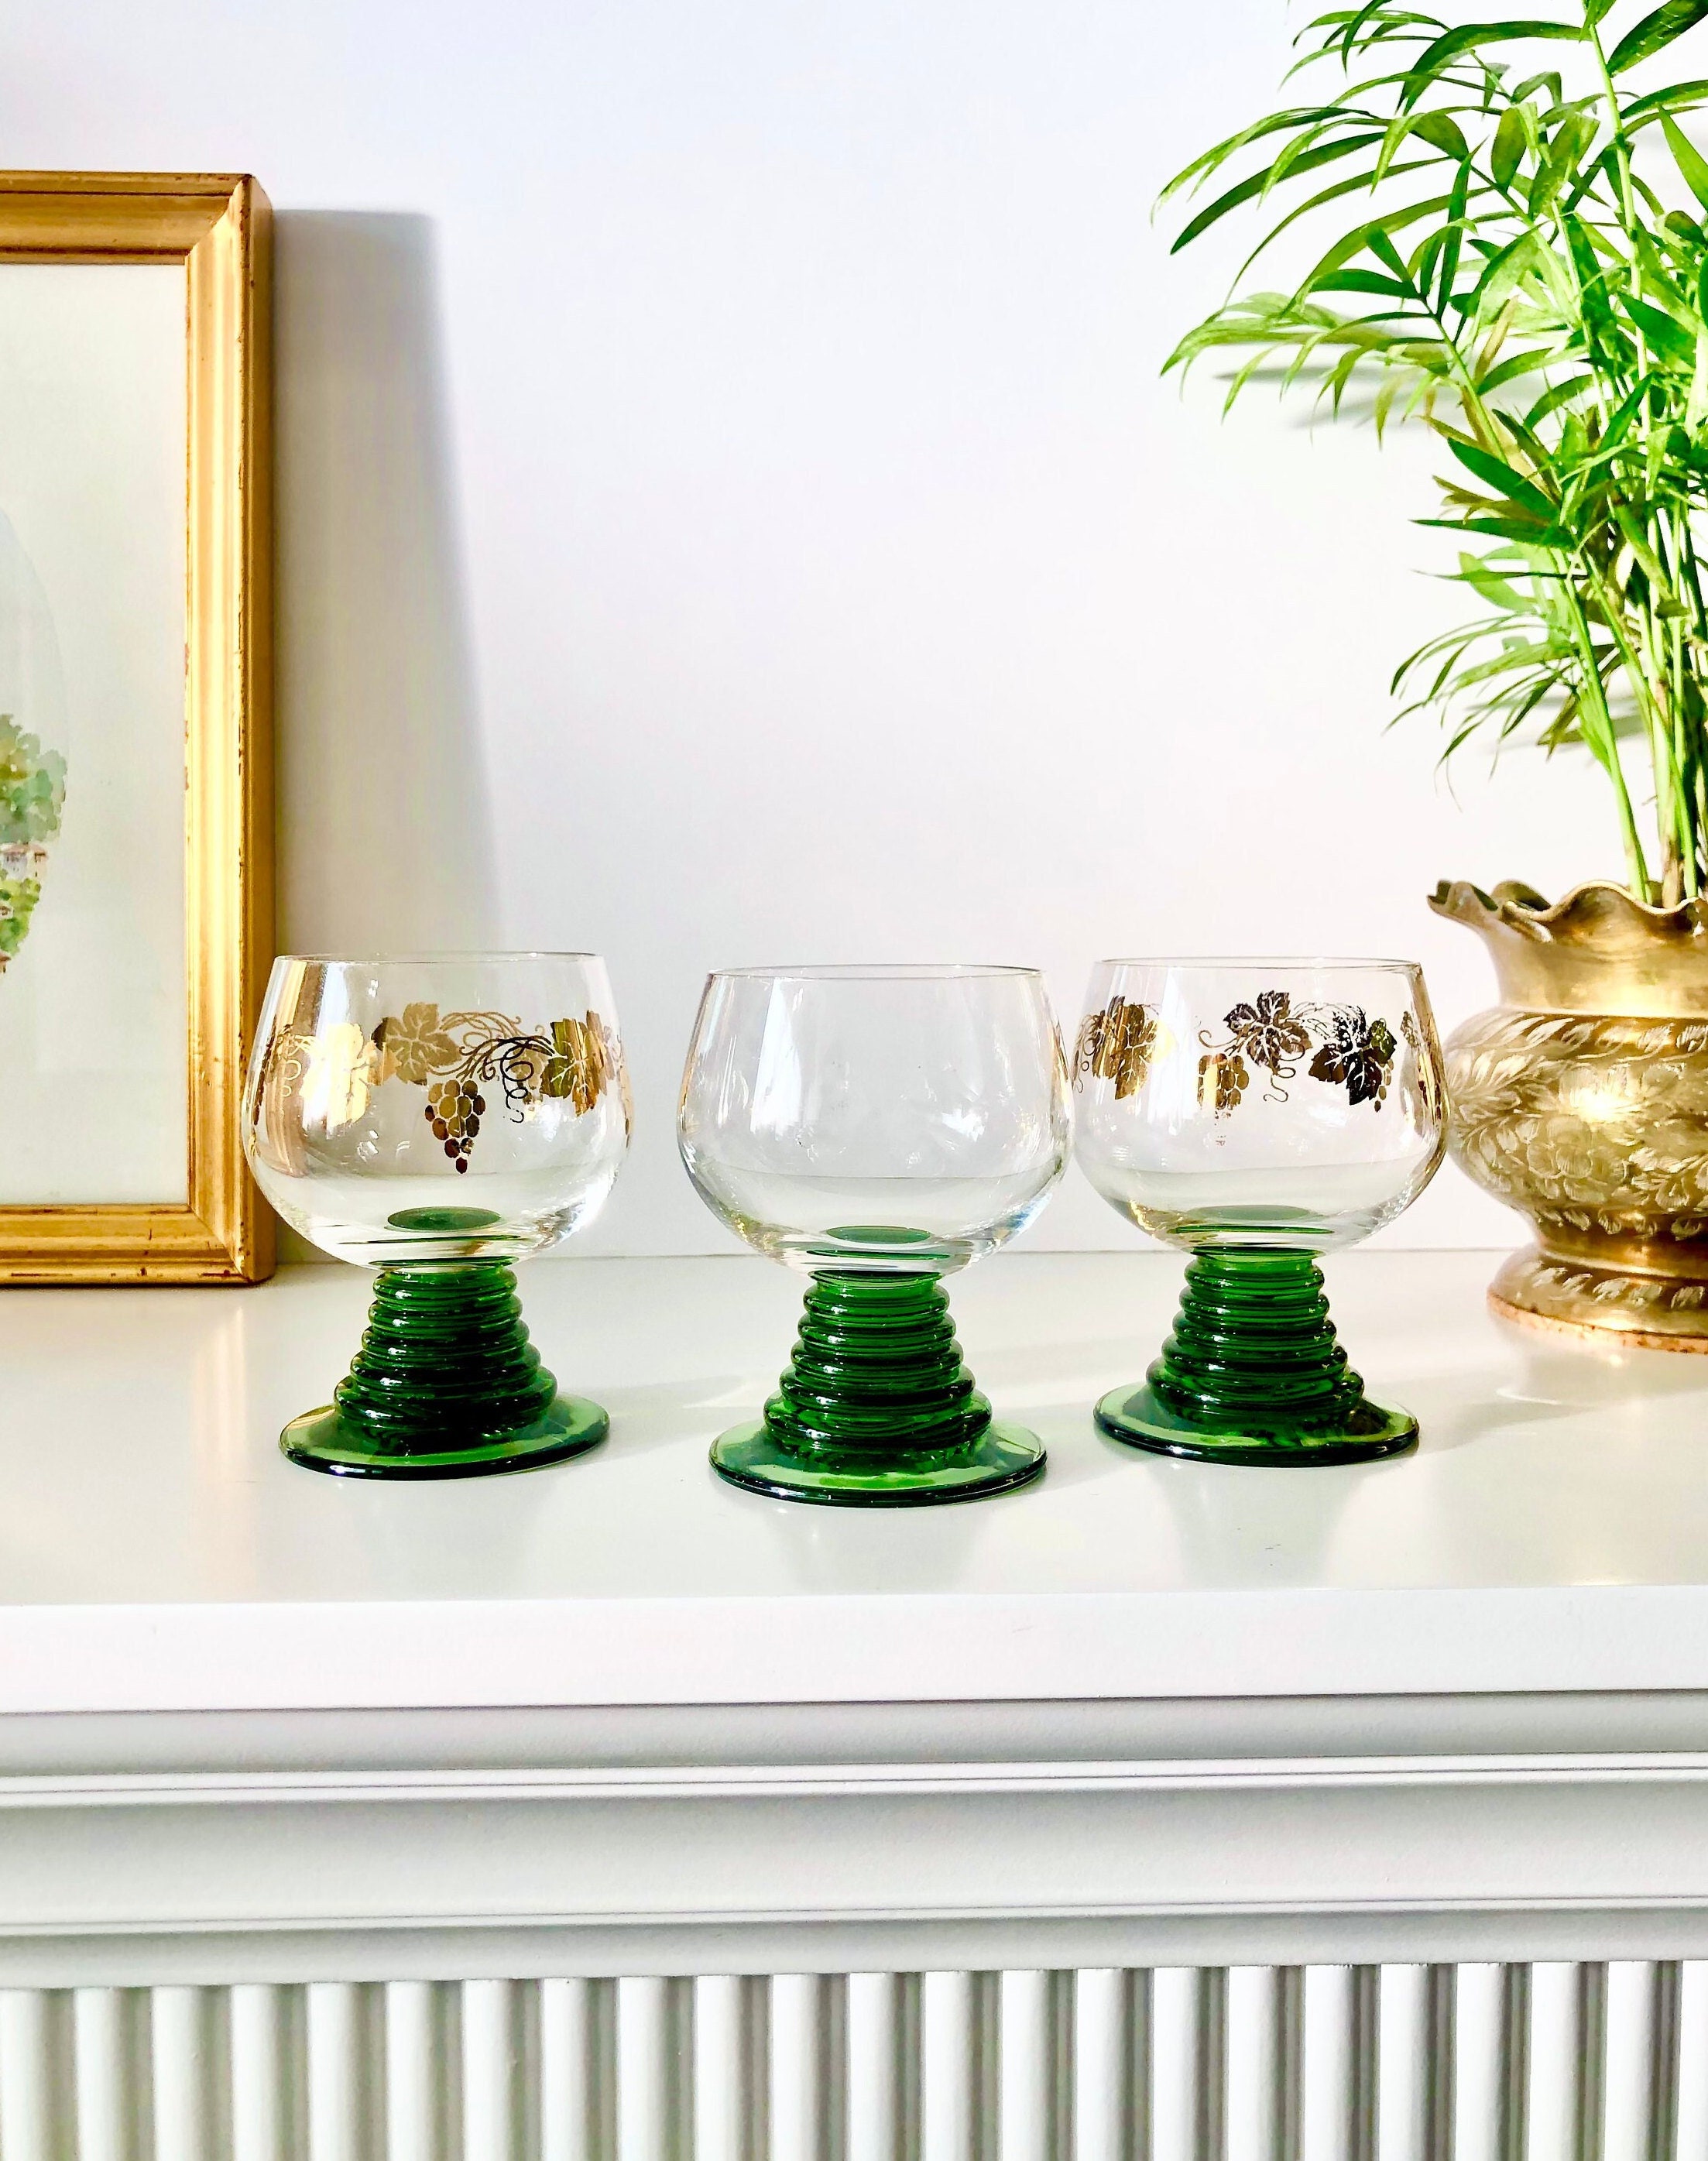 Vintage German Crystal Water Glasses from Gallo, 1970s, Set of 6